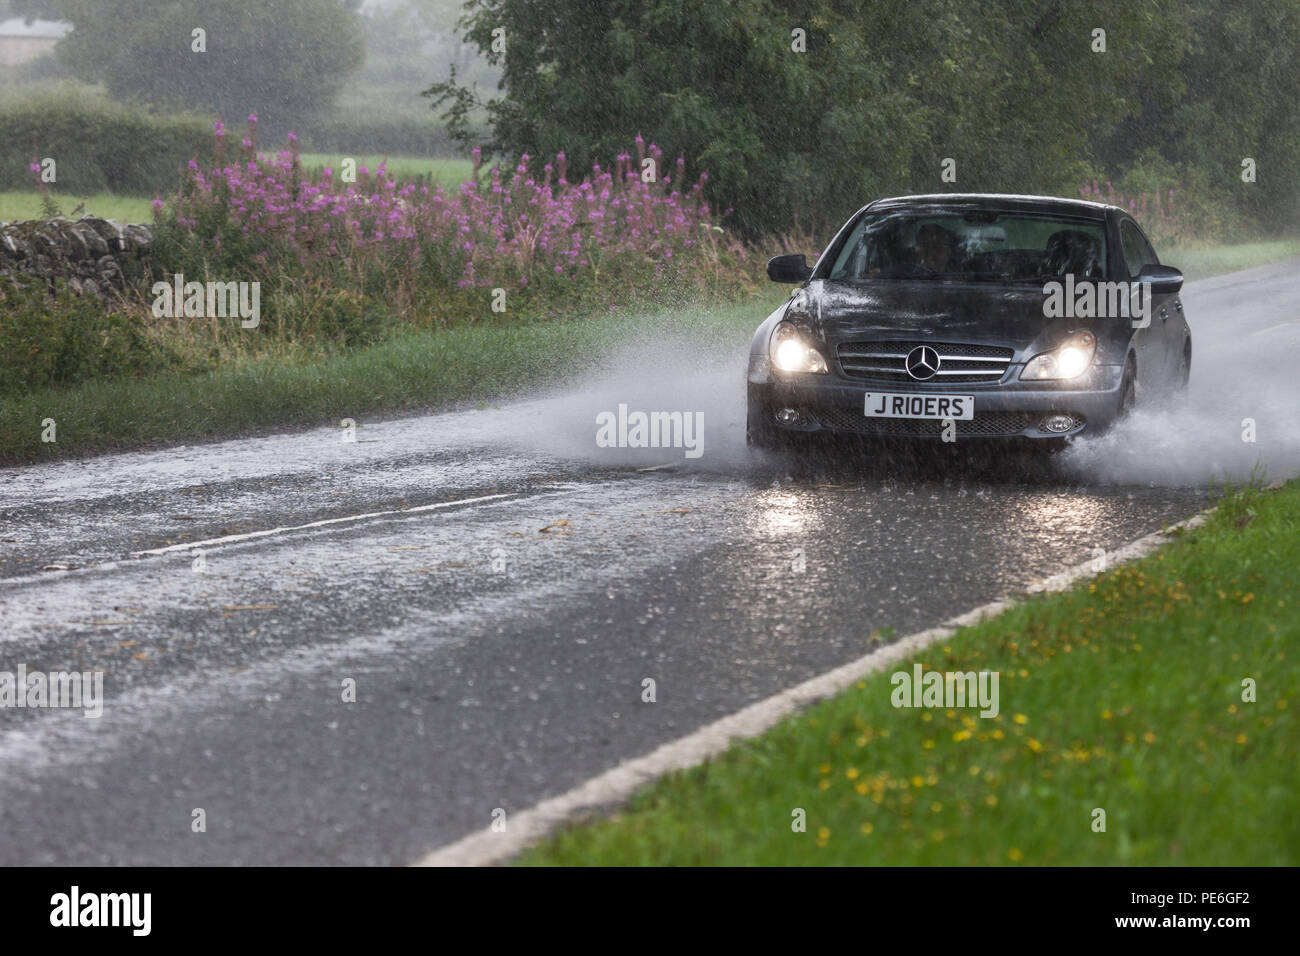 Barnard Castle, Teesdale, County Durham, UK.  Monday 13th August 2018.  UK Weather.  Torrential rain has flooded some roads in the area around Barnard Castle this afternoon, creating hazardous driving conditions. Credit: David Forster/Alamy Live News Stock Photo